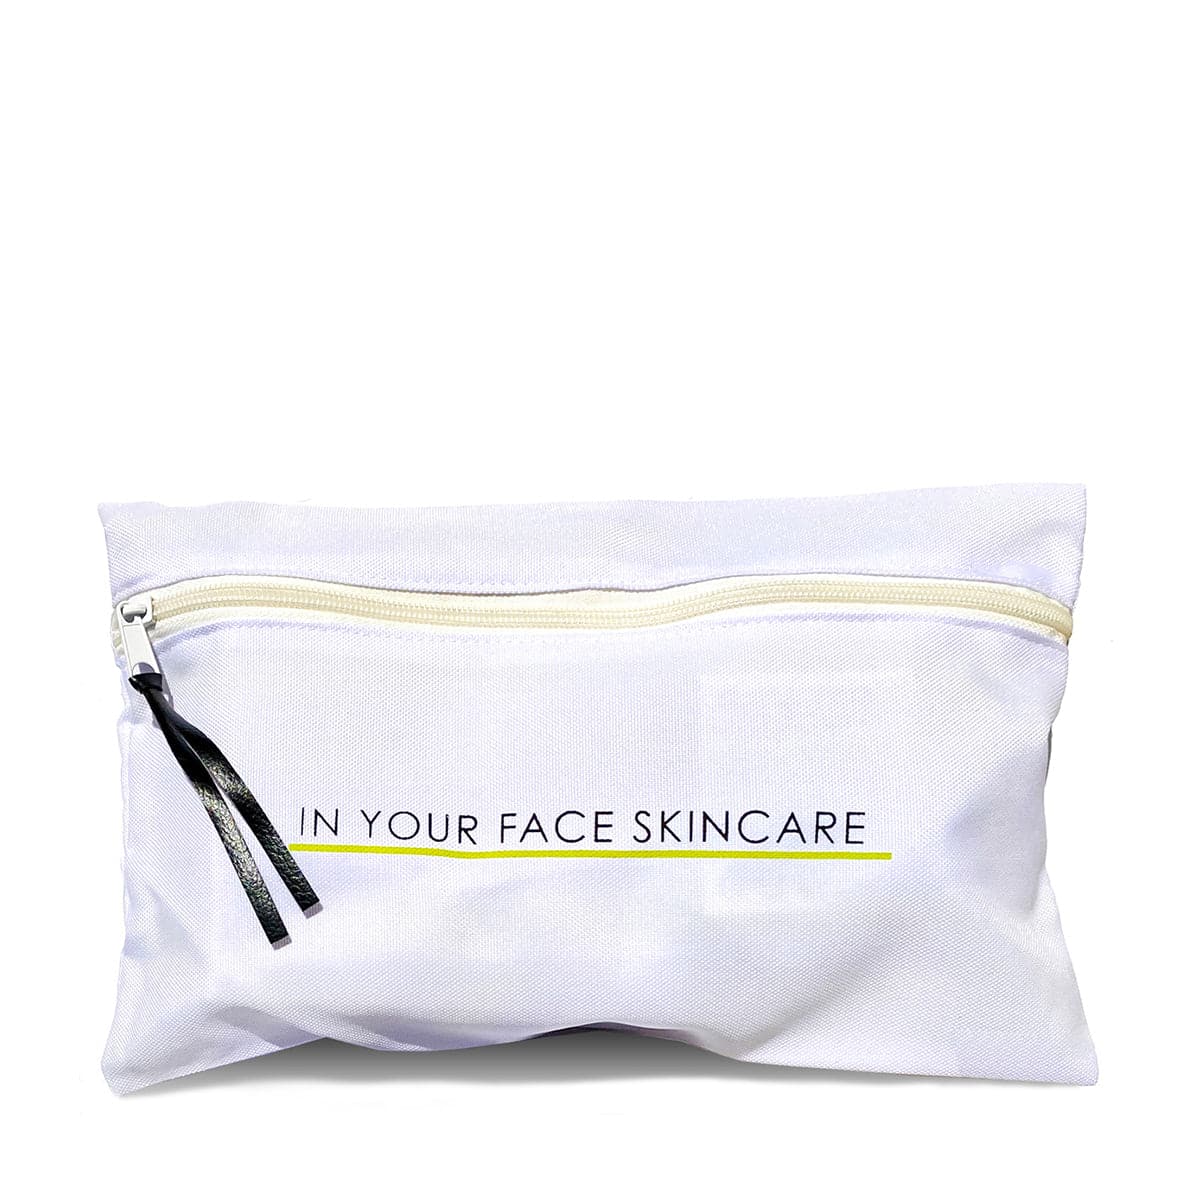 an image of the IN YOUR FACE MAKEUP BAG on a white background